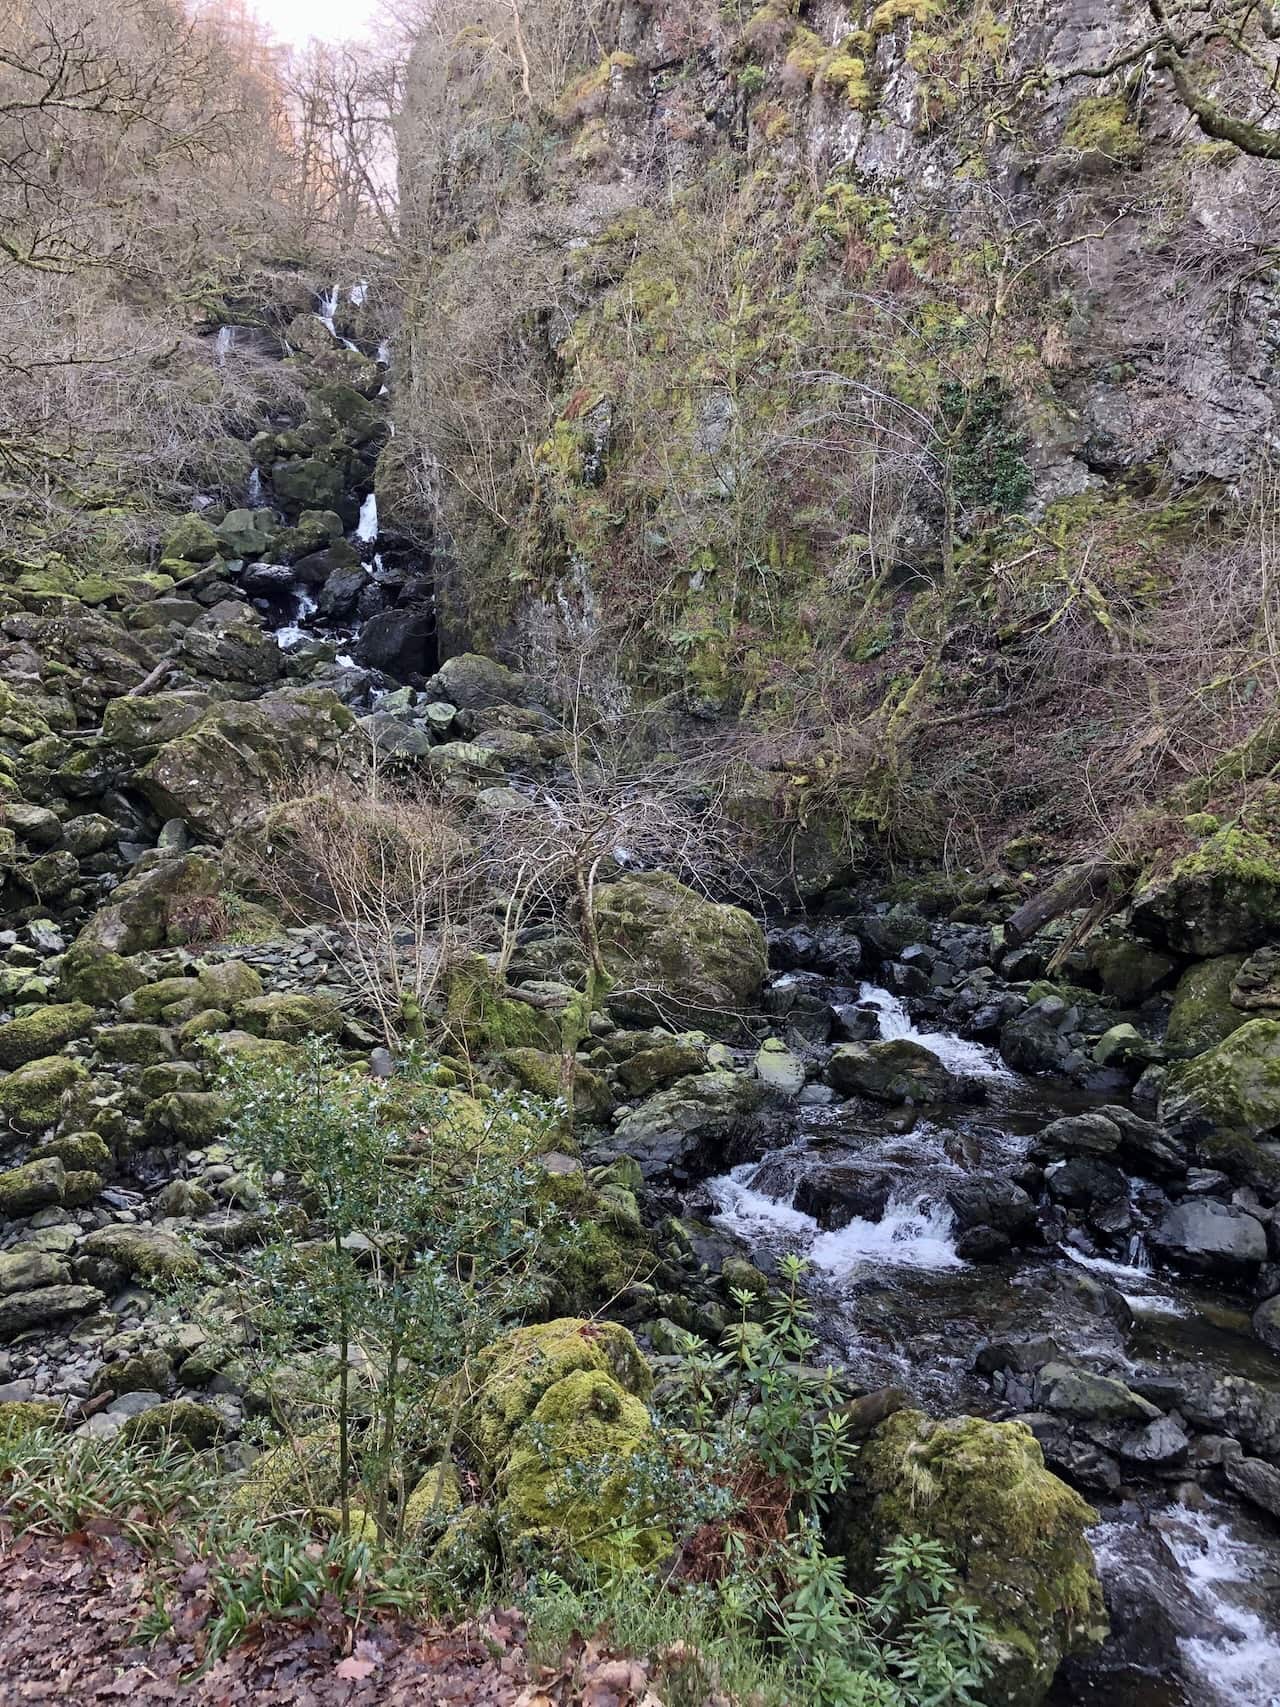 The Lodore Falls, where Watendlath Beck flows north from Watendlath Tarn and plunges more than 30 metres into the Borrowdale valley, just behind the Lodore Falls Hotel. This stunning waterfall is a notable feature on the Derwent Water circular walk.